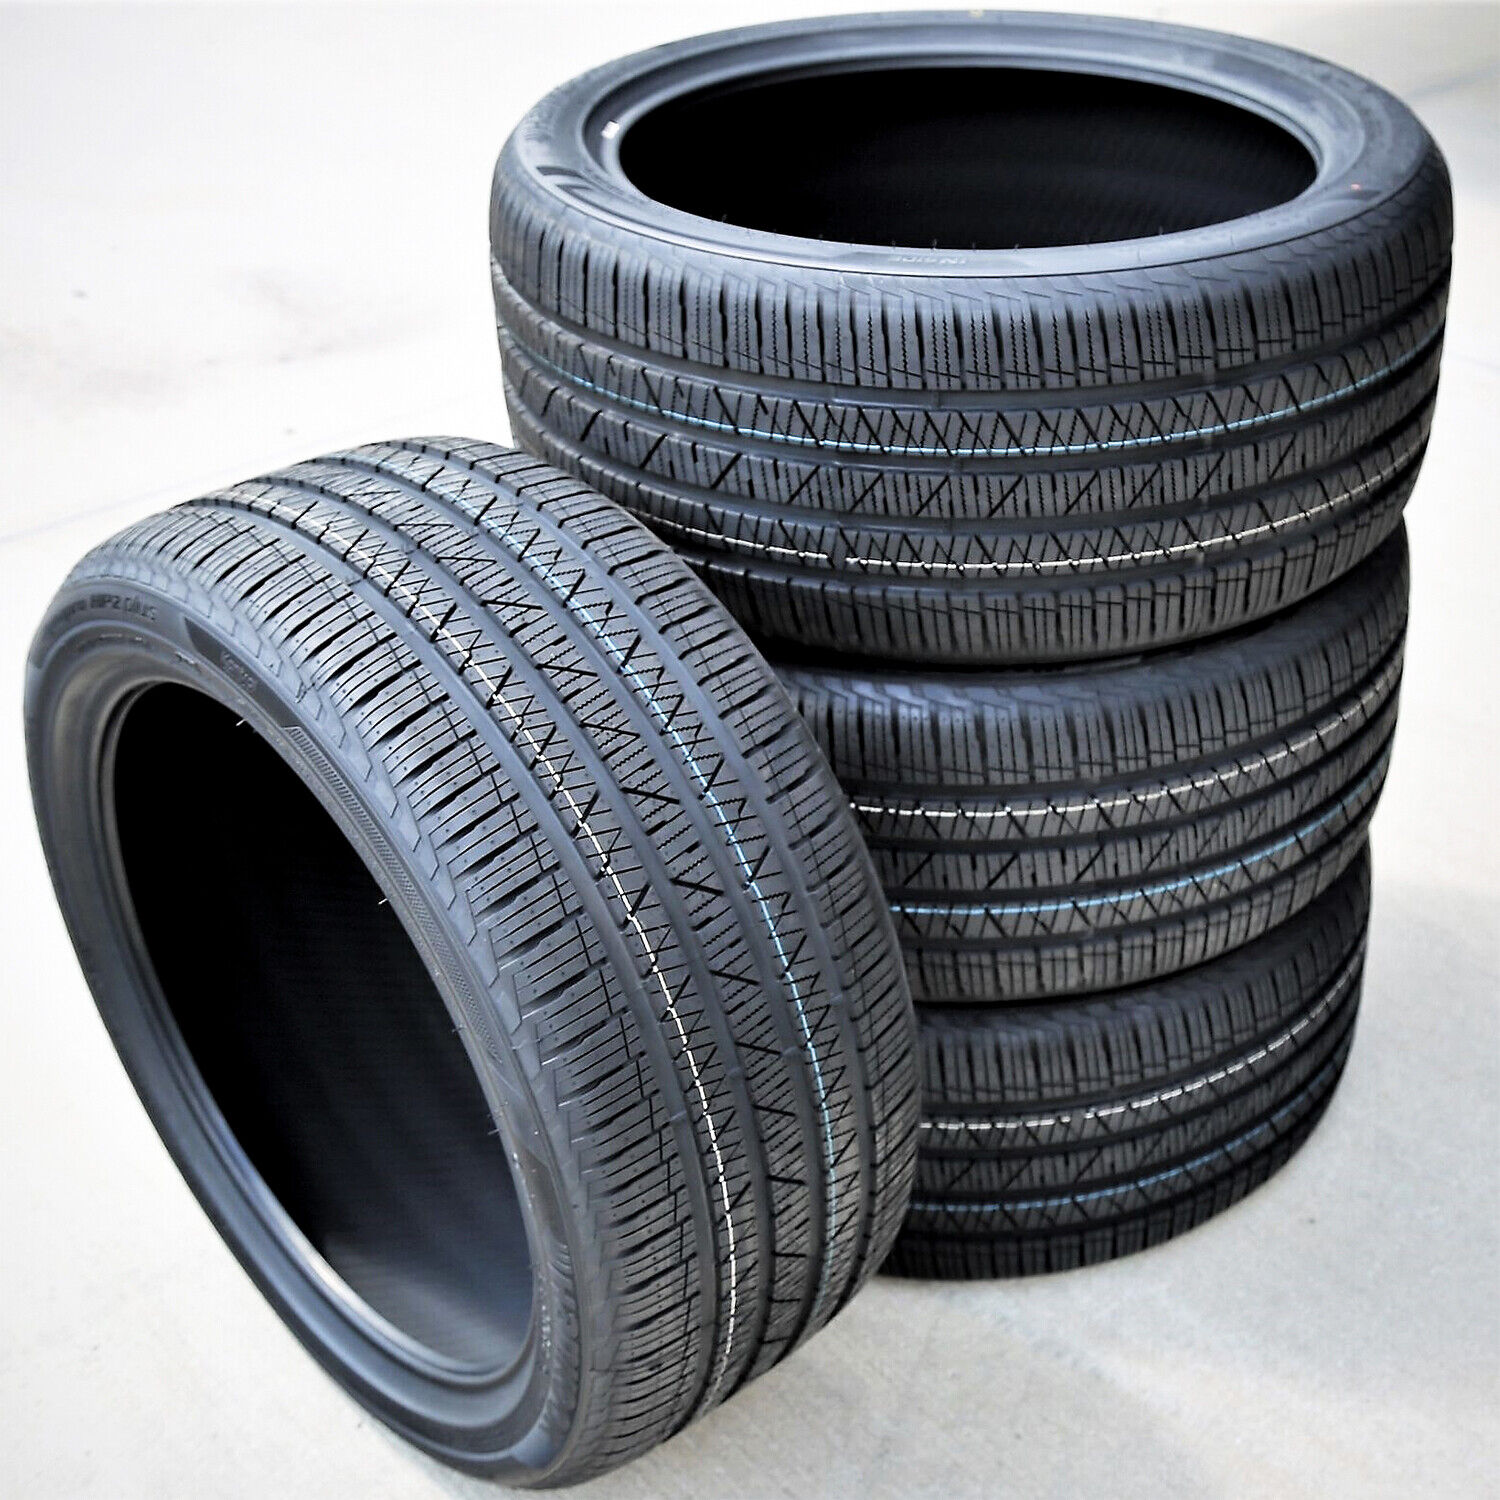 4 Tires Hankook Dynapro HP2 Plus 285/45R21 113H XL (AO) AS A/S Performance